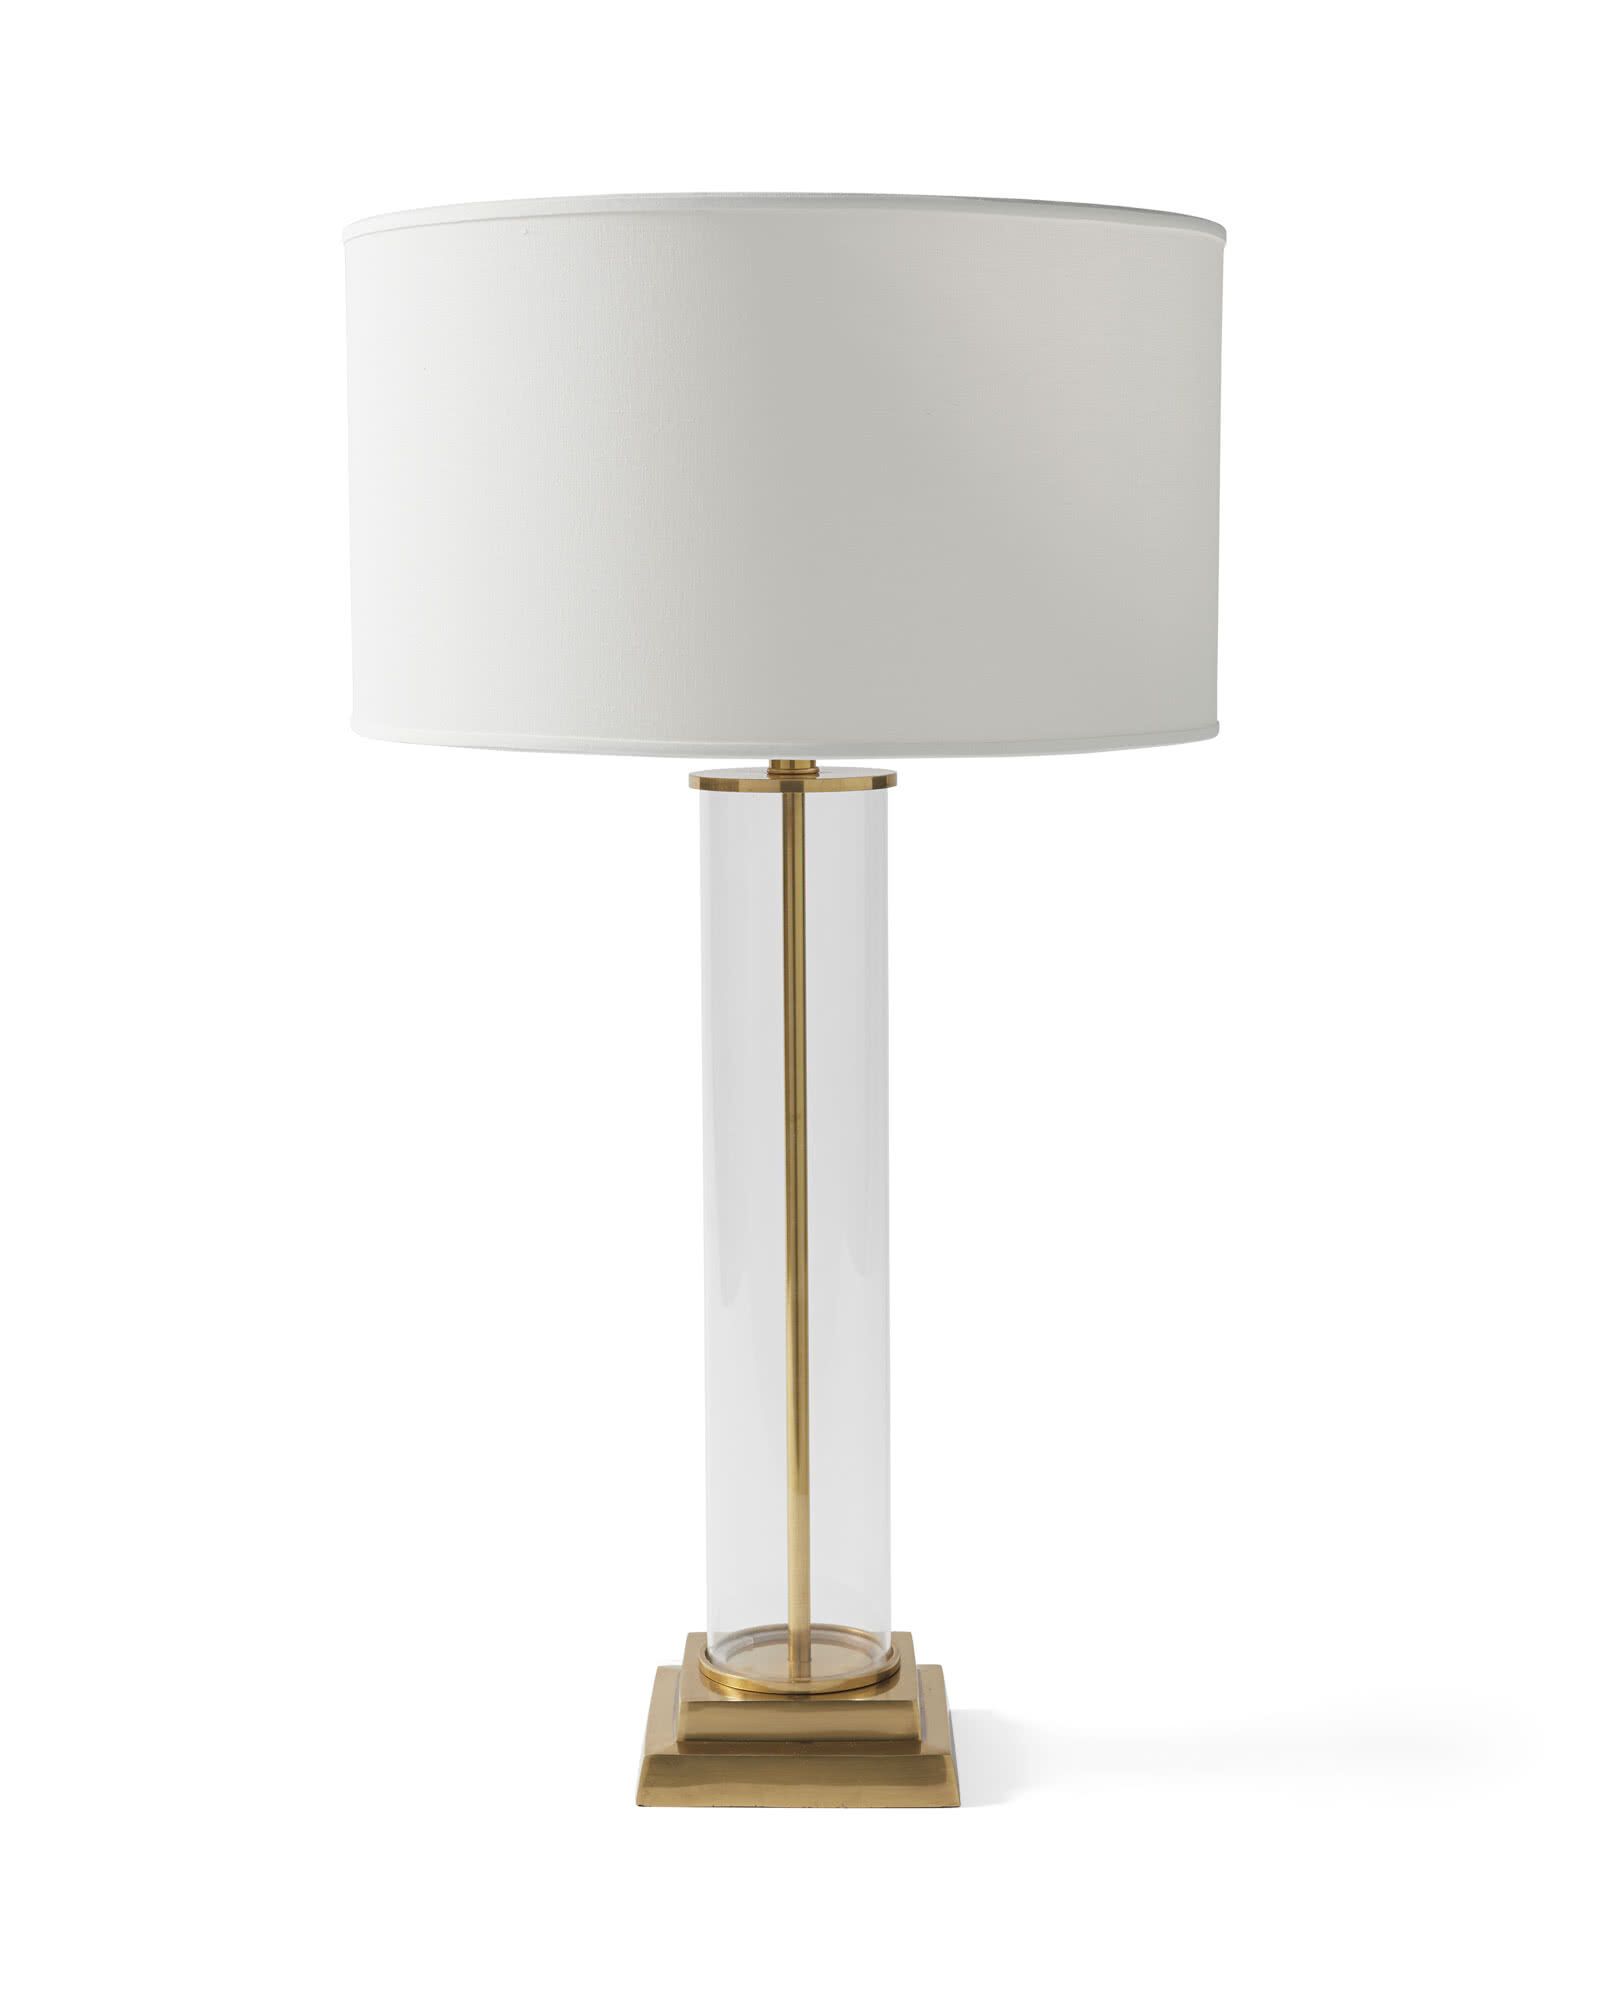 Hyde Park Table Lamp | Serena and Lily